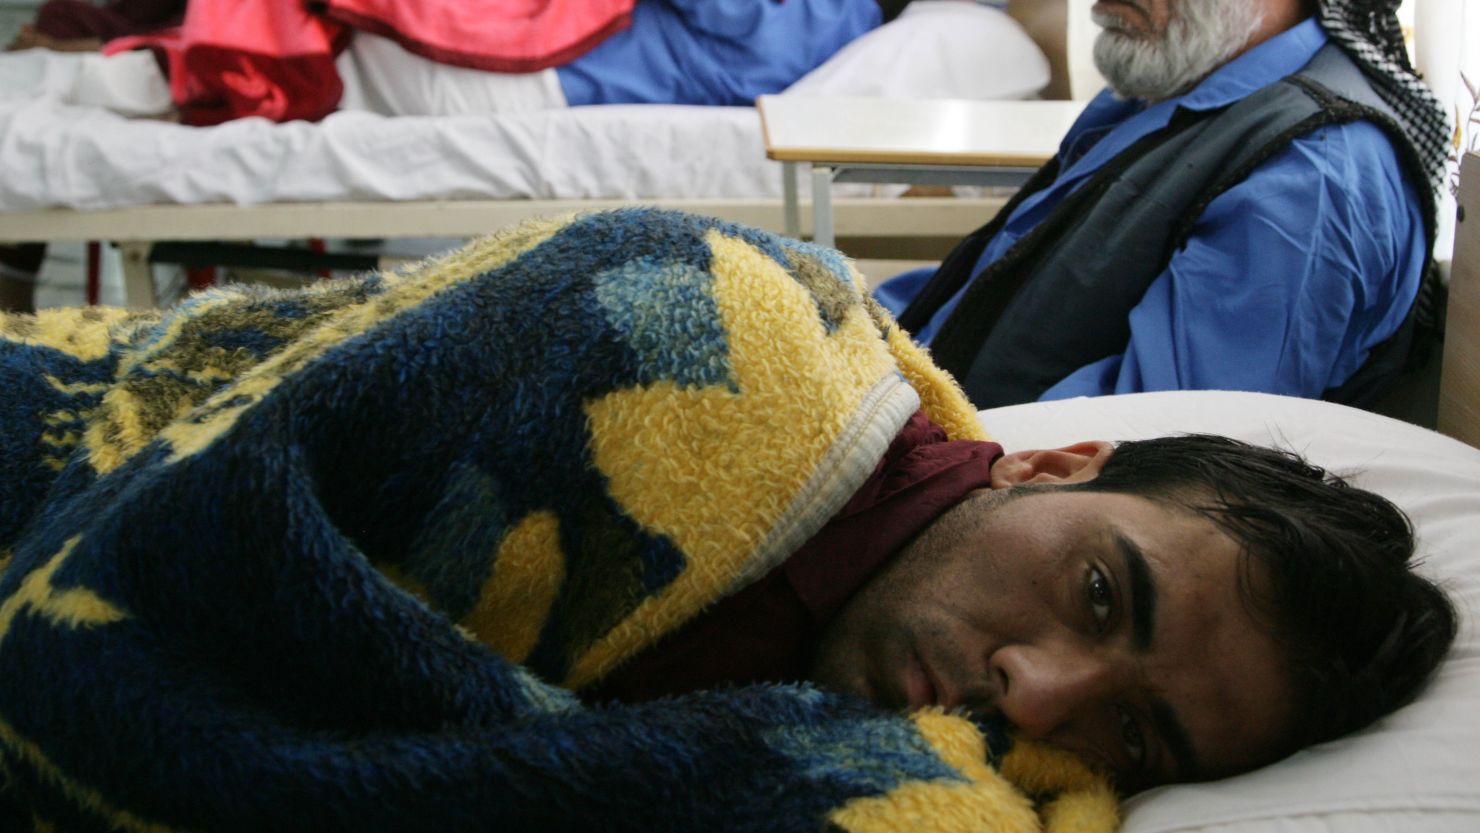 Wounded Iraqi men rest in a hospital in Iraqi city of Arbil on April 25, 2013 after they were injured during violent clashes.